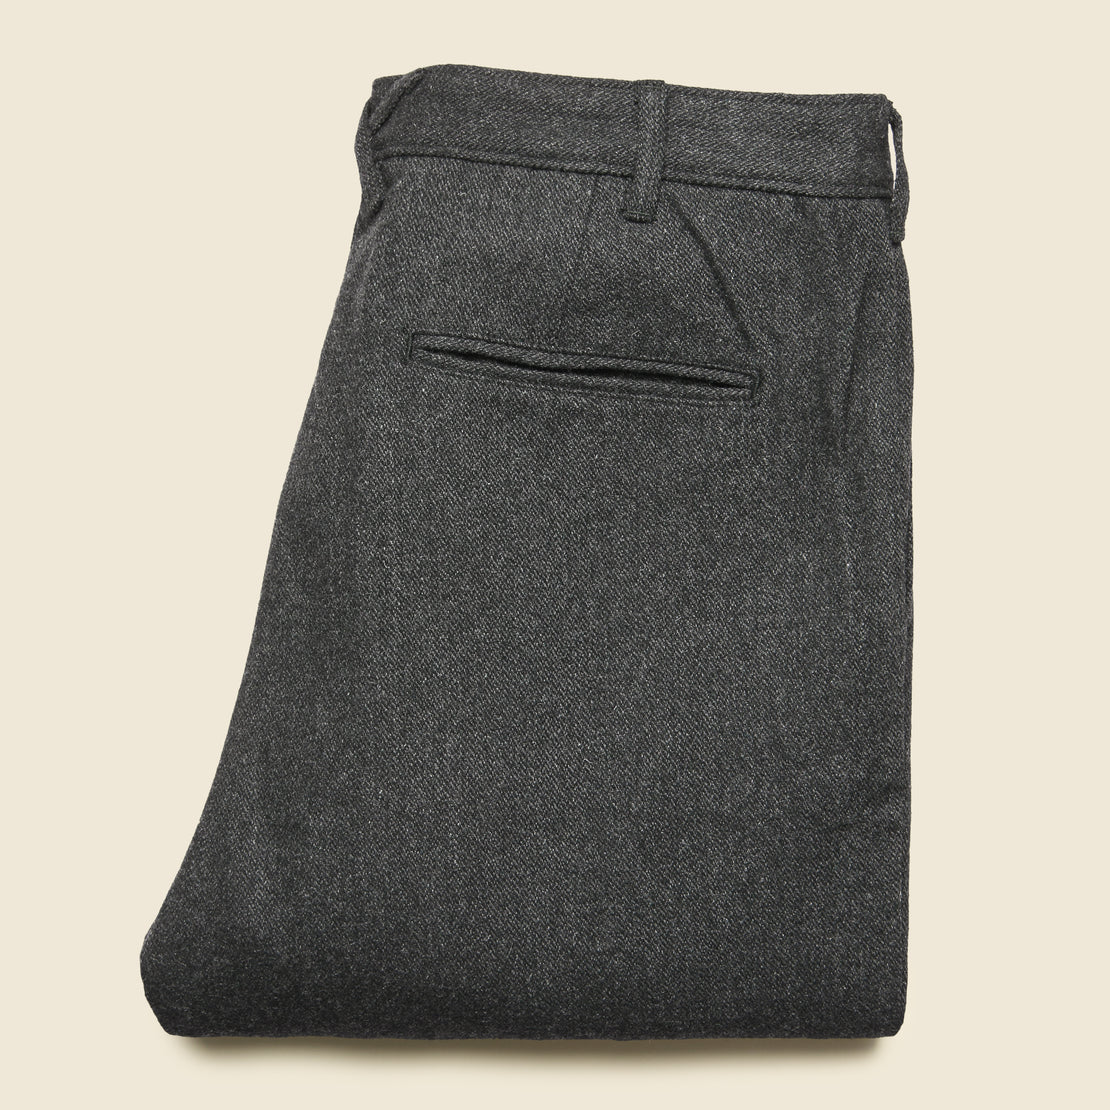 Herringbone Pleated Pant - Charcoal - Alex Mill - STAG Provisions - Suiting - Suit Pant